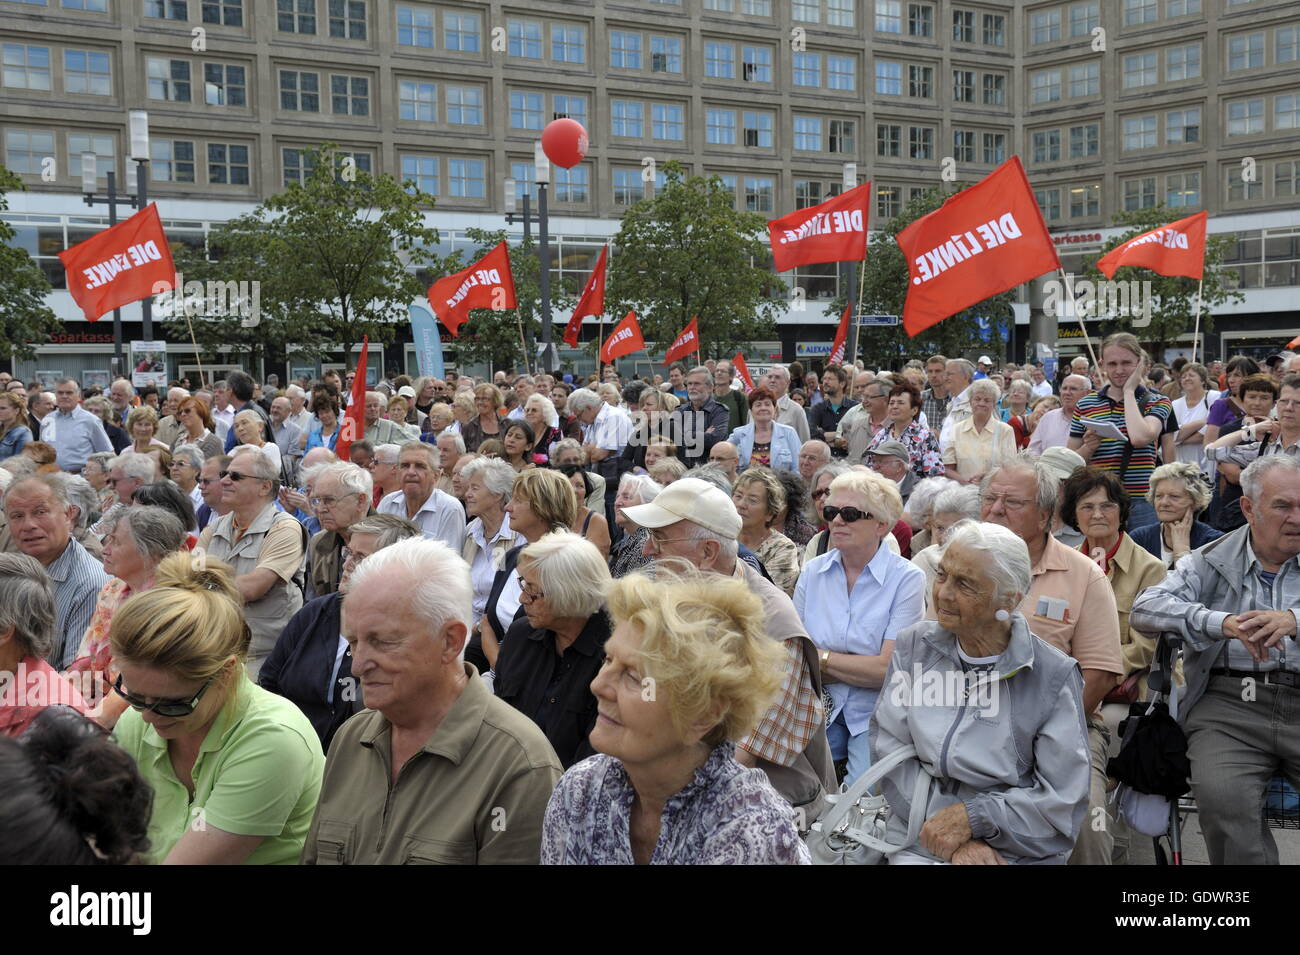 Campaign tour of the Left Party on Alexanderplatz Stock Photo